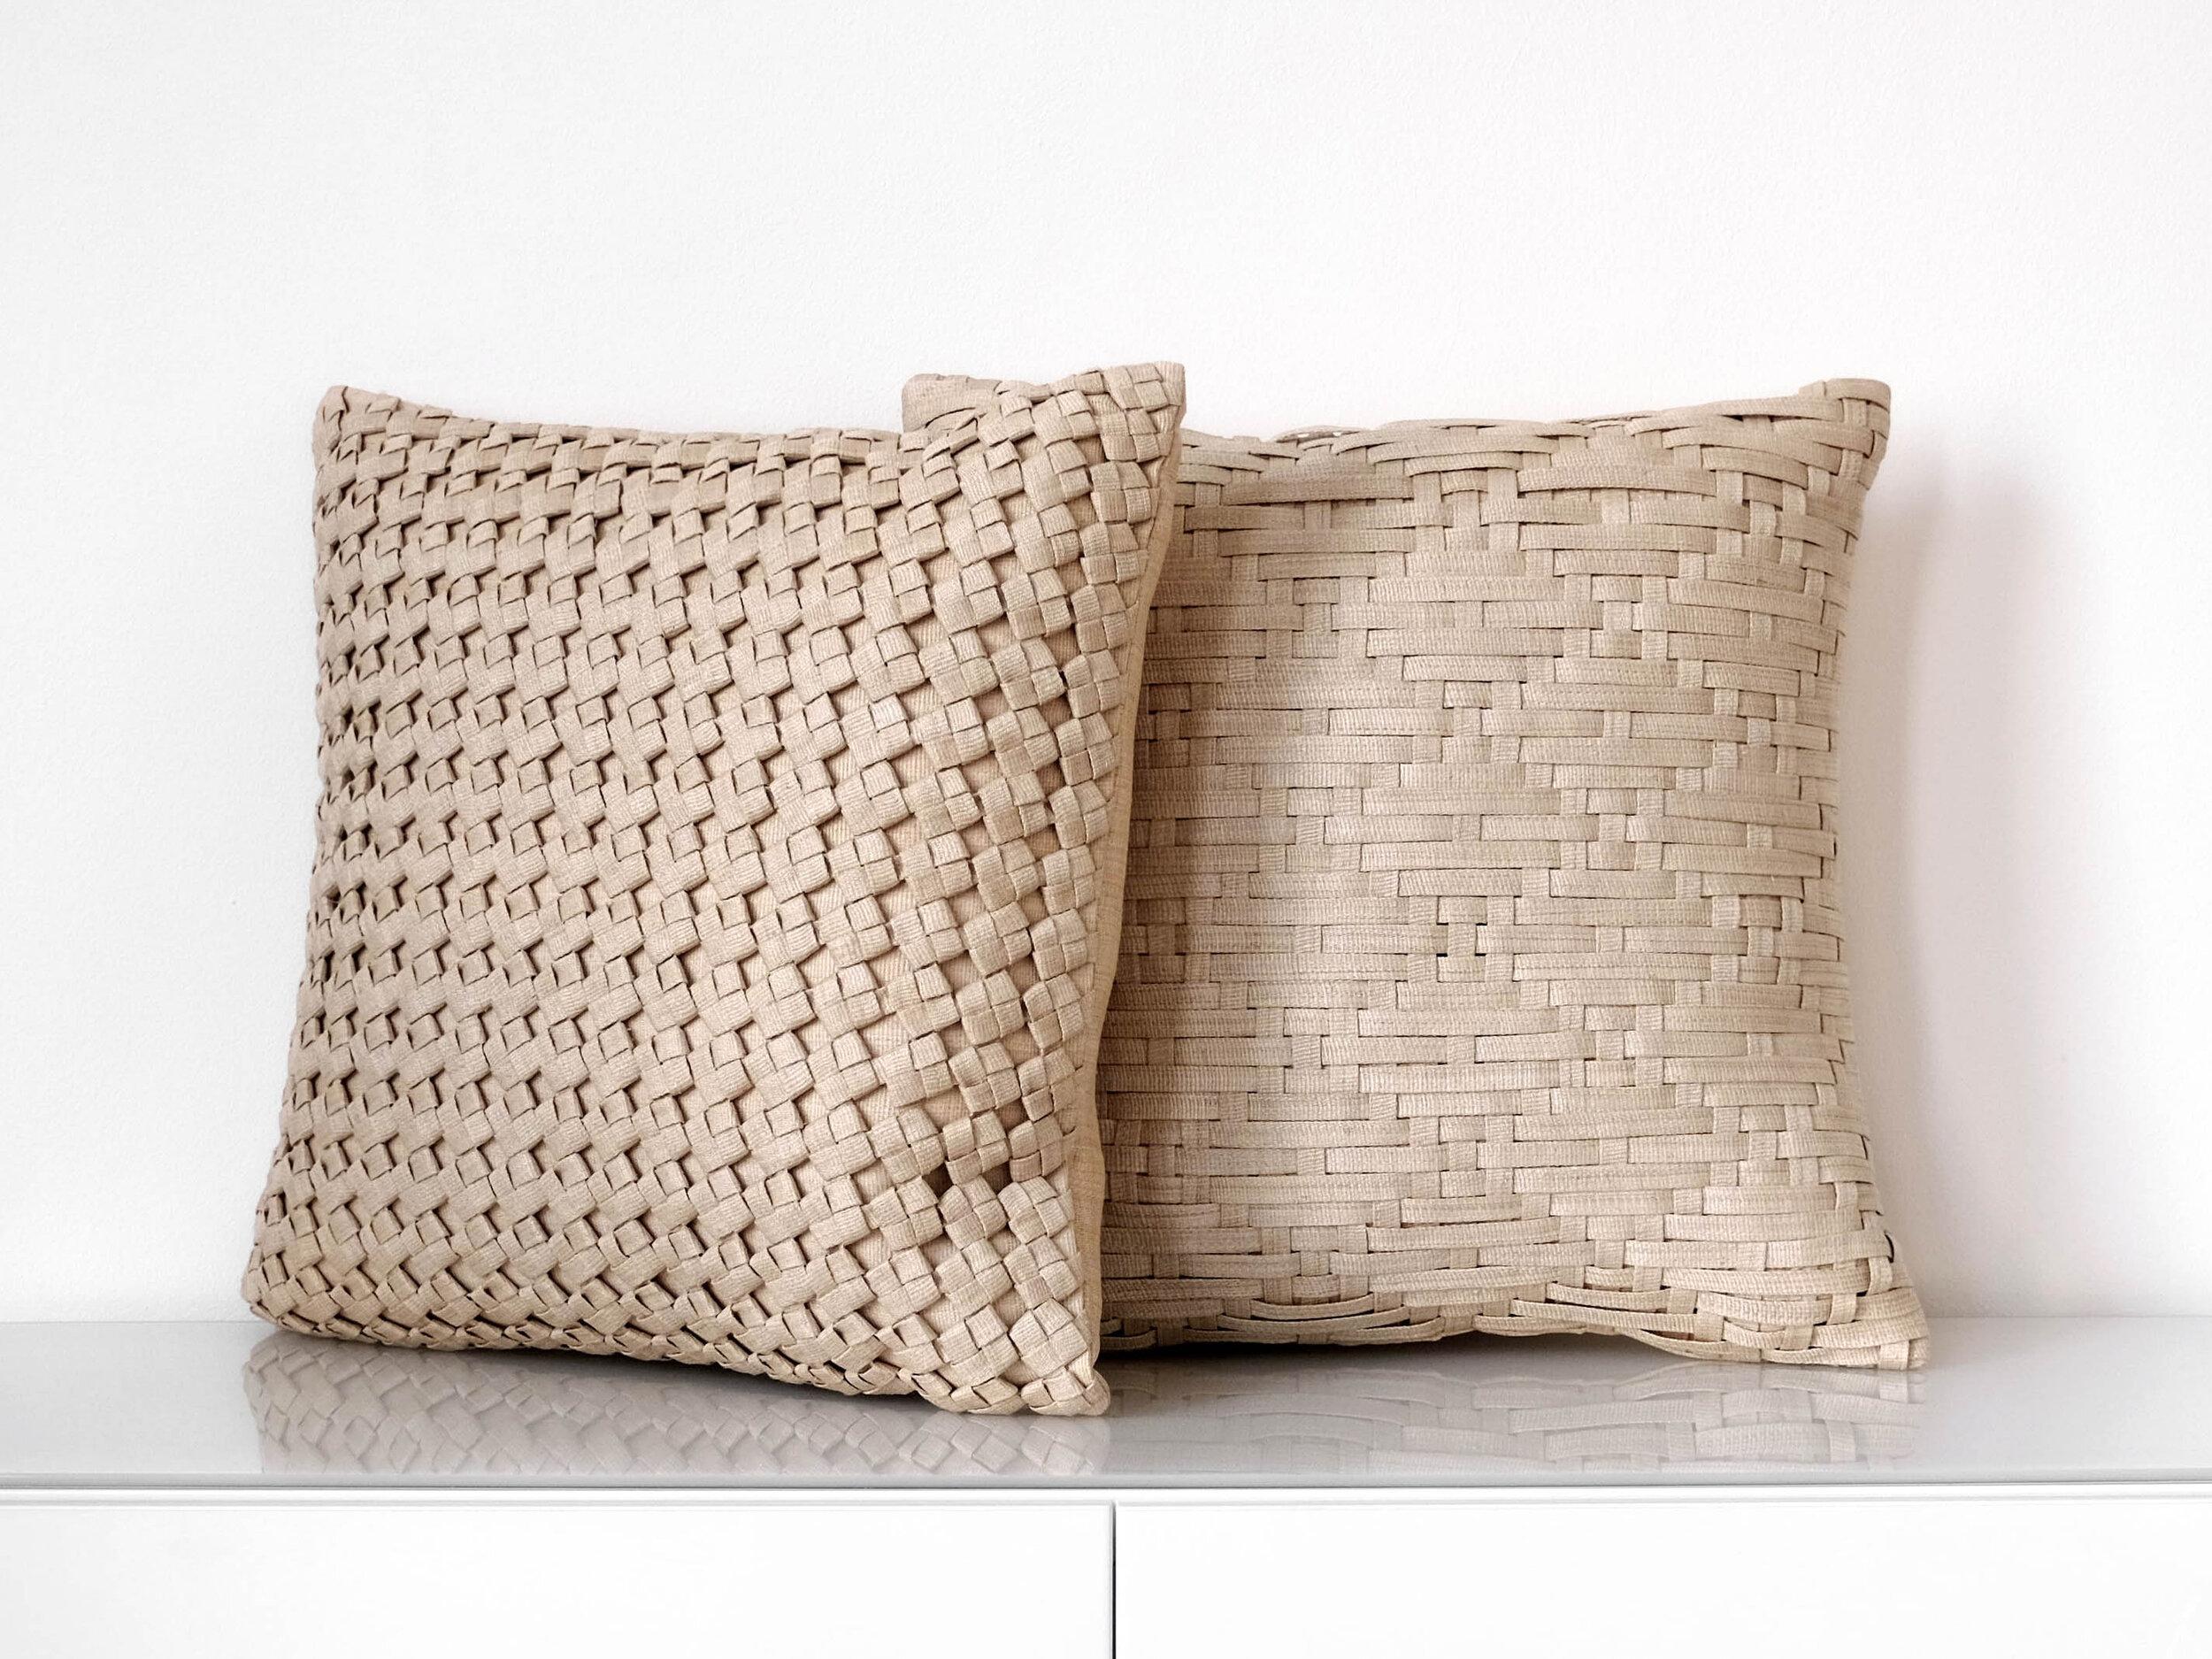 Hand-Woven Handcrafted T'nalak Square Knot Weave Cushion Cover For Sale